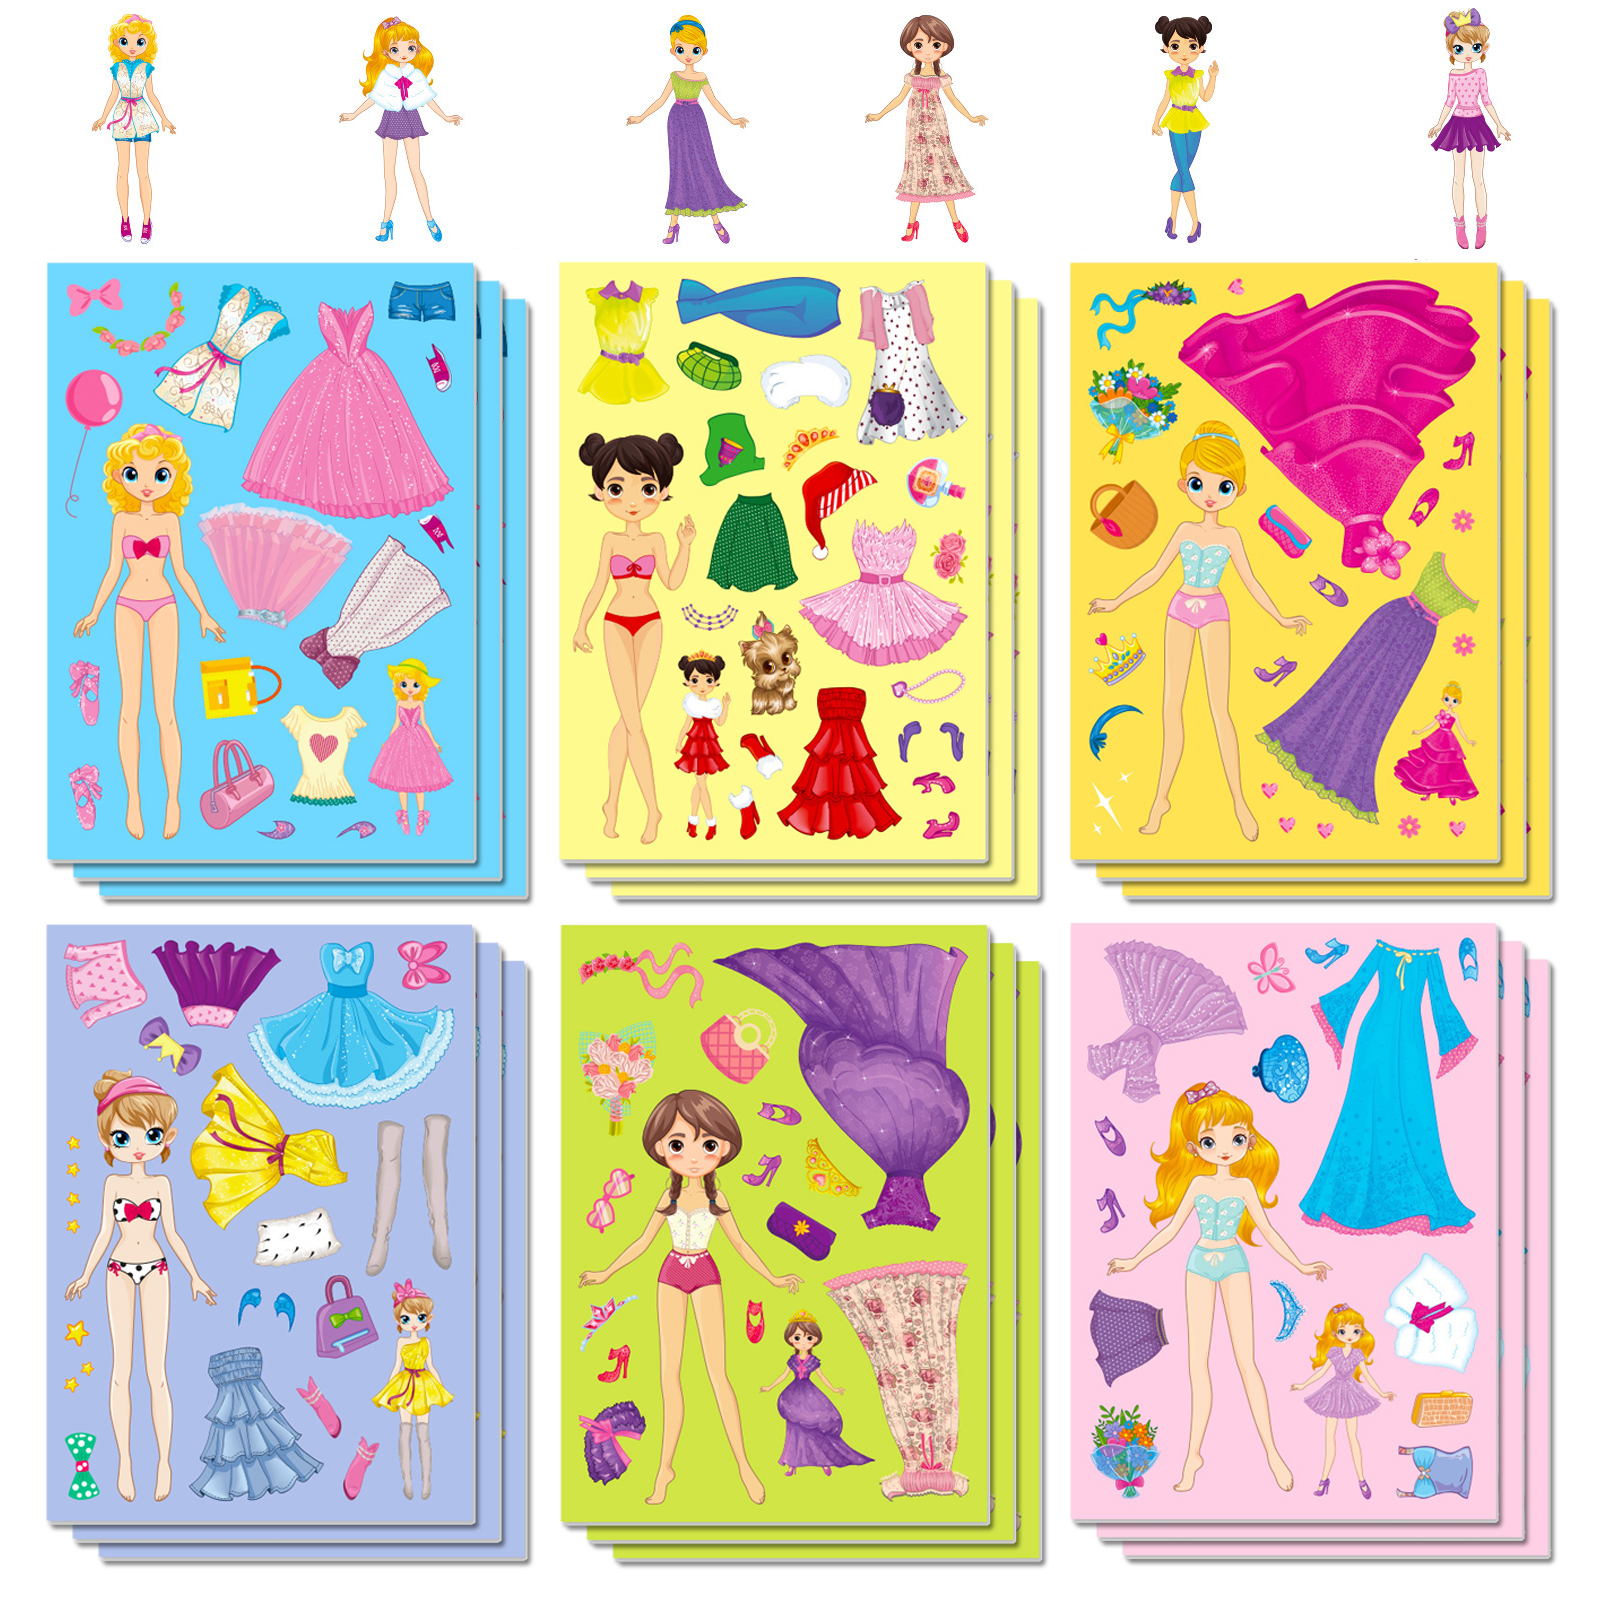 6/18 Sheets 21.08cm x 14.99cm Dress Up Your Own Doll Stickers With Pretty Various Evening Dress Jewelry Bag And Shoes, Party Favors Supplies, Holiday Gifts, DIY Crafts Easter gift